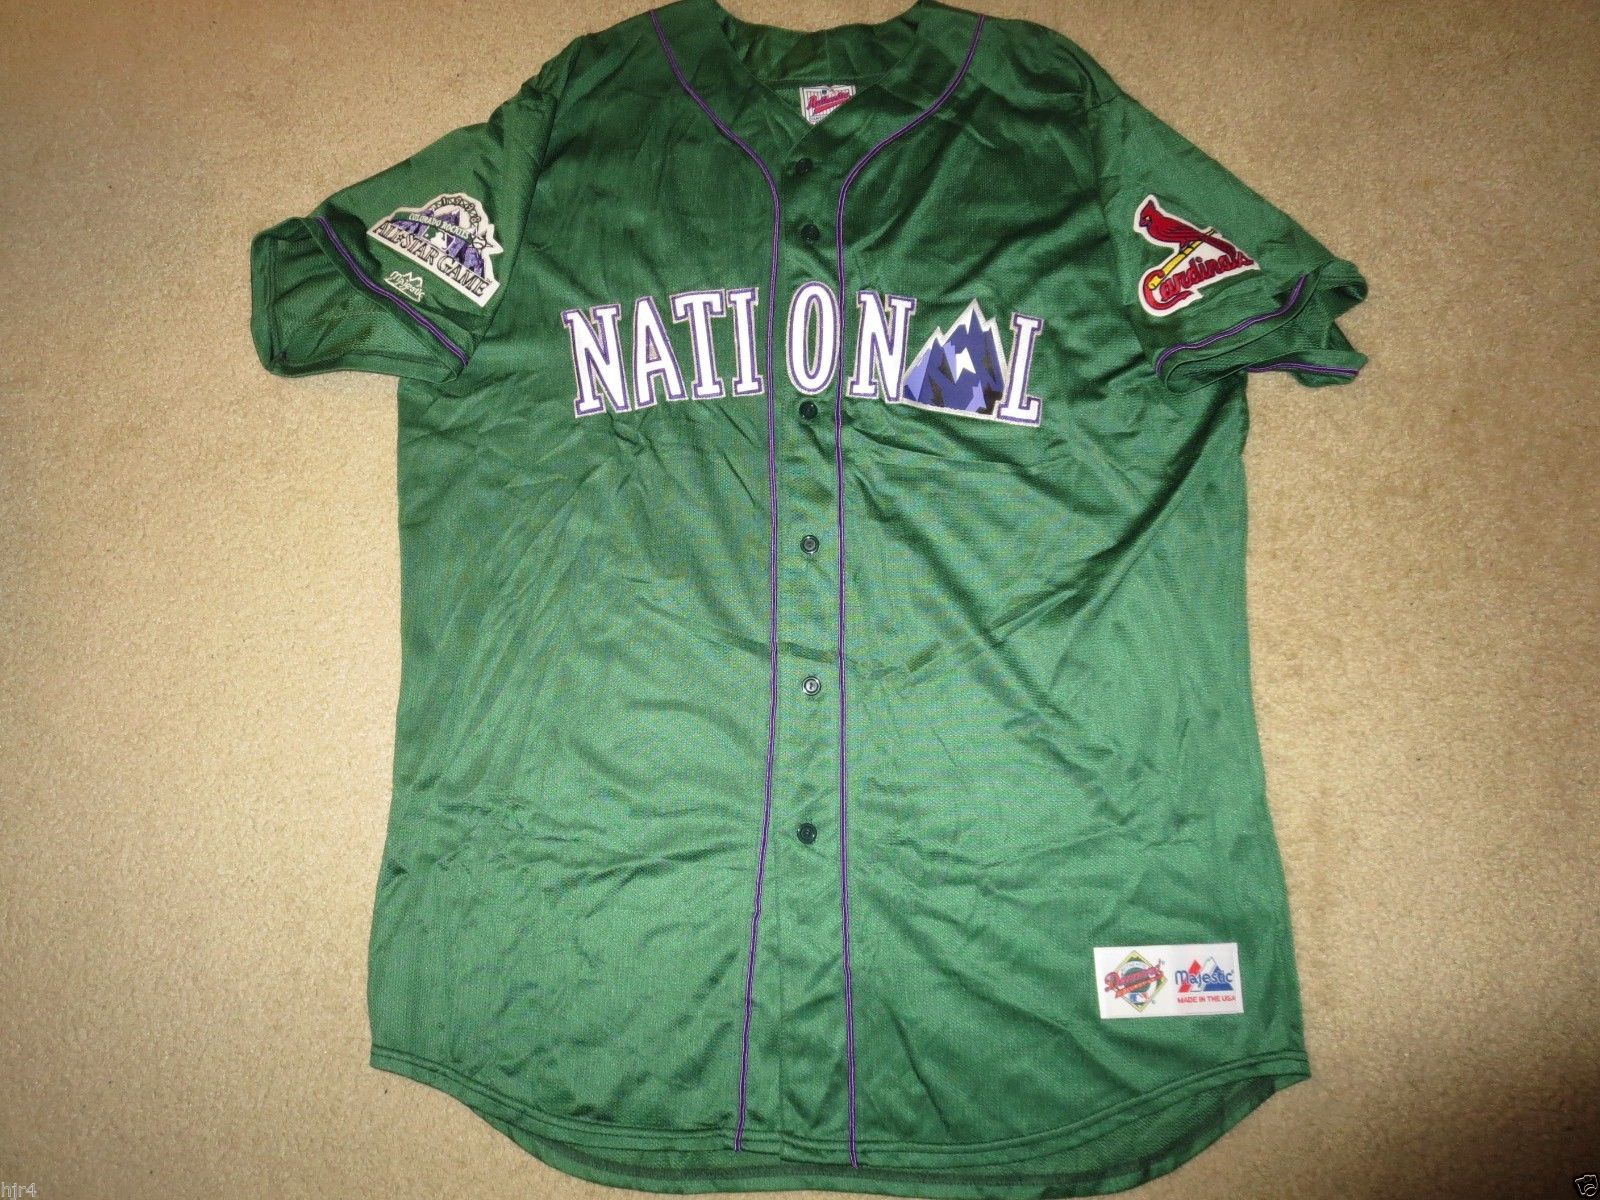  1998 Rockies BP All Star Game Jersey